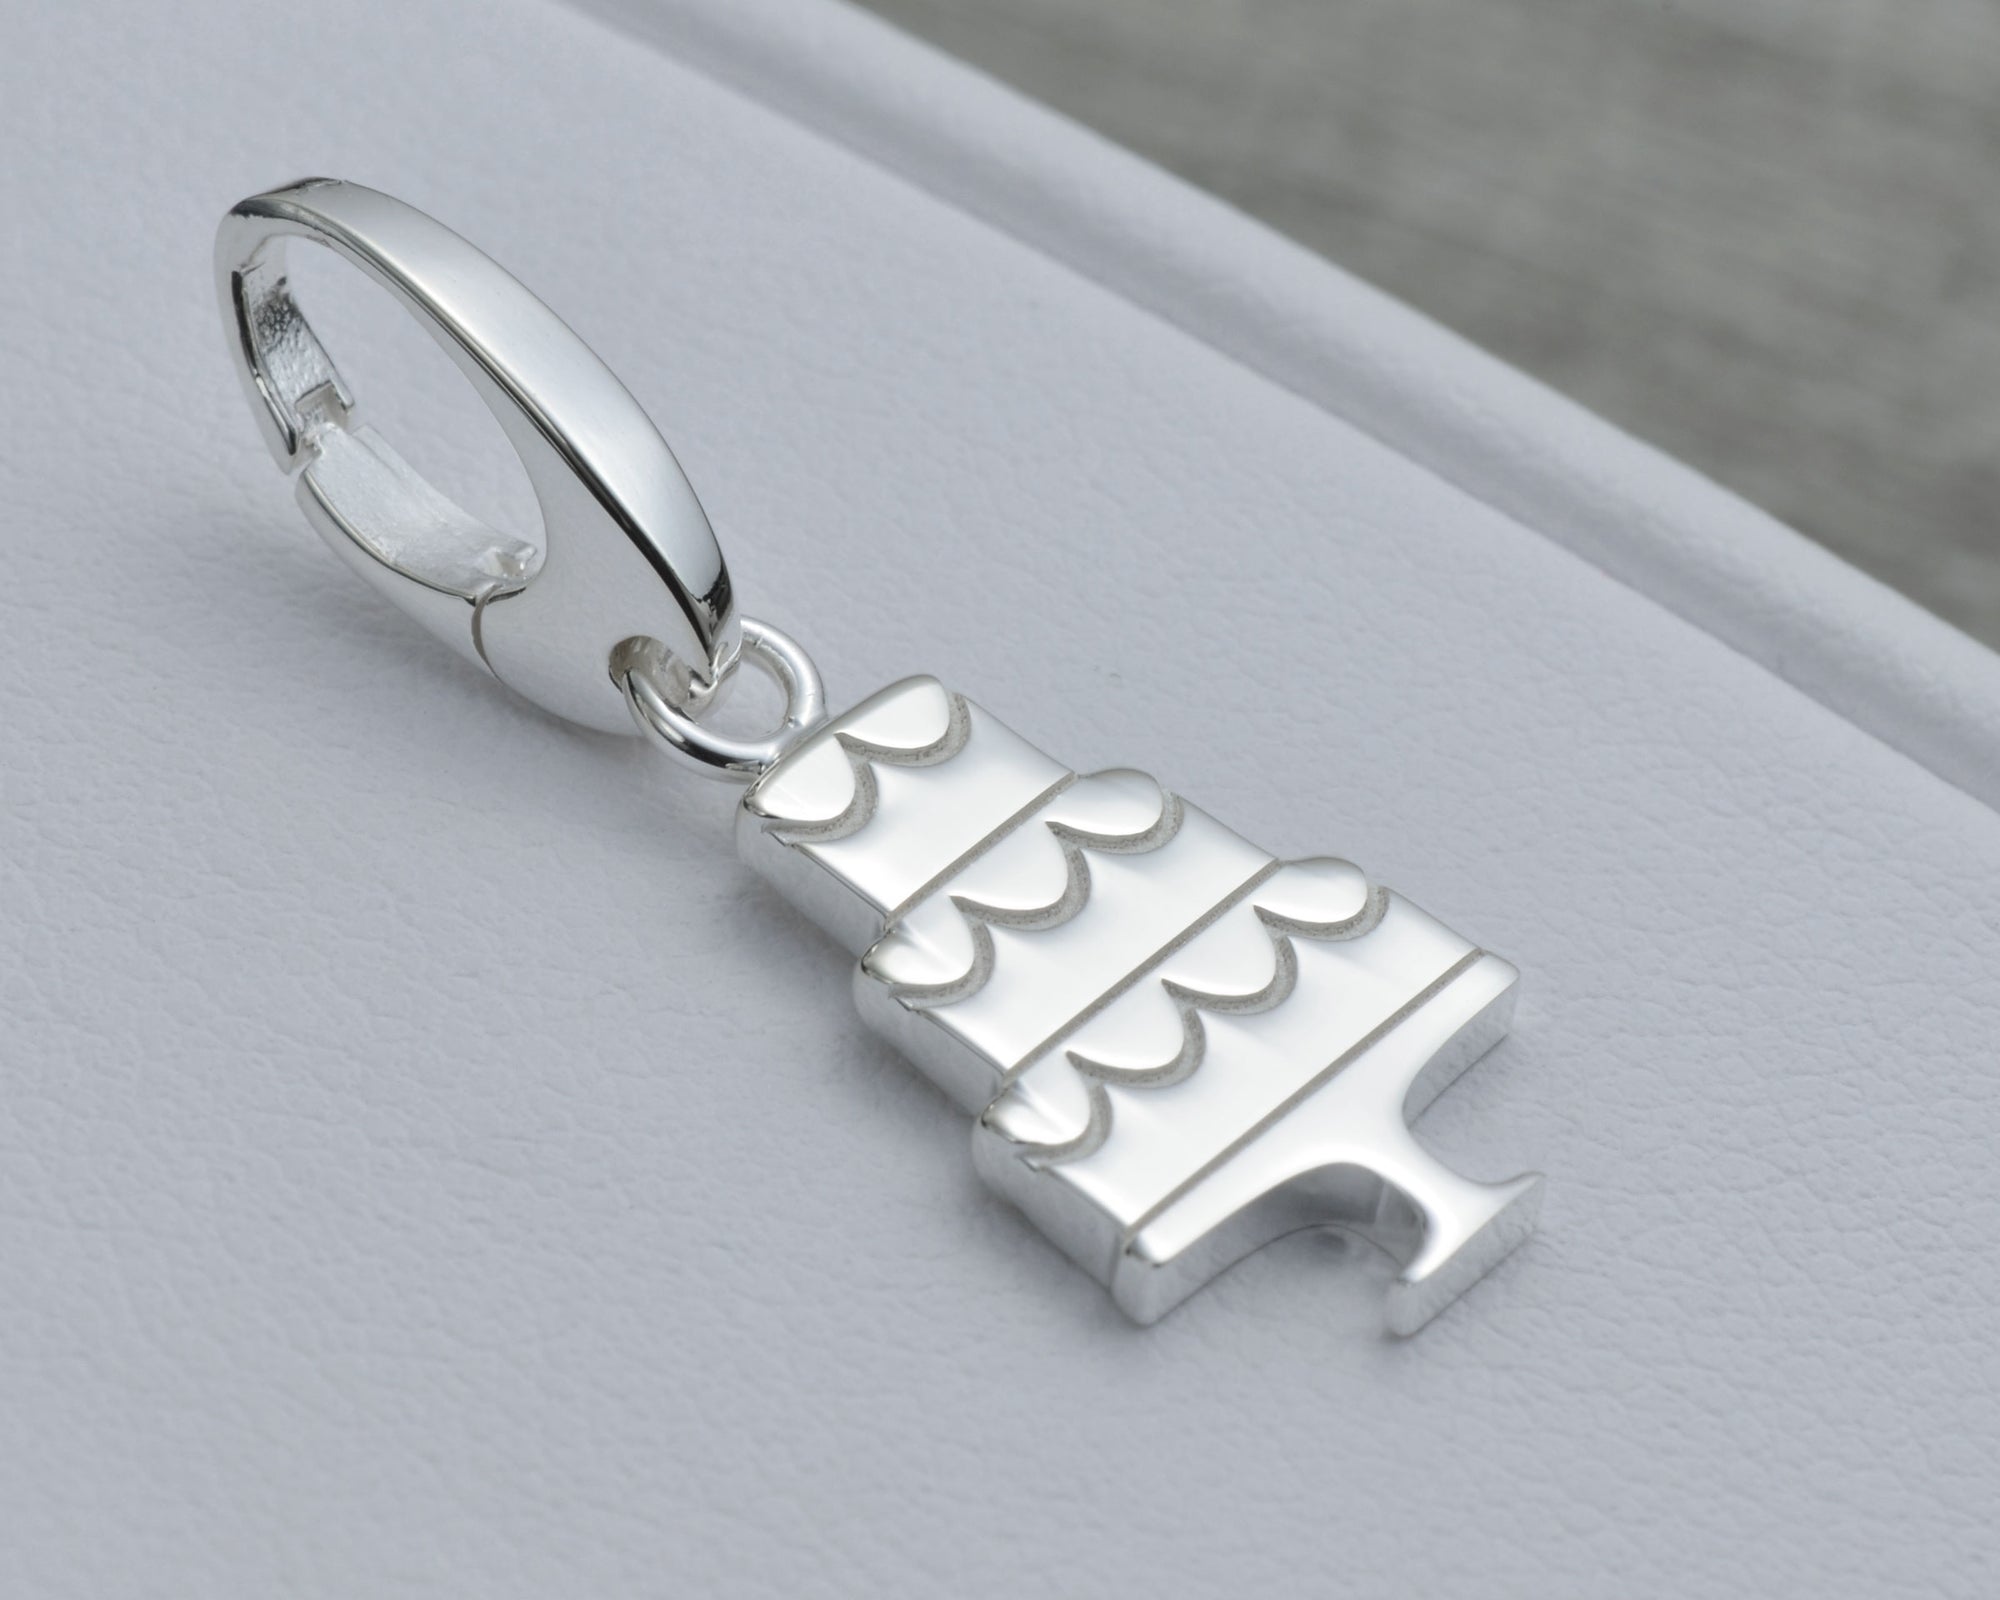 WEDDING CAKE CHARM IN STERLING SILVER